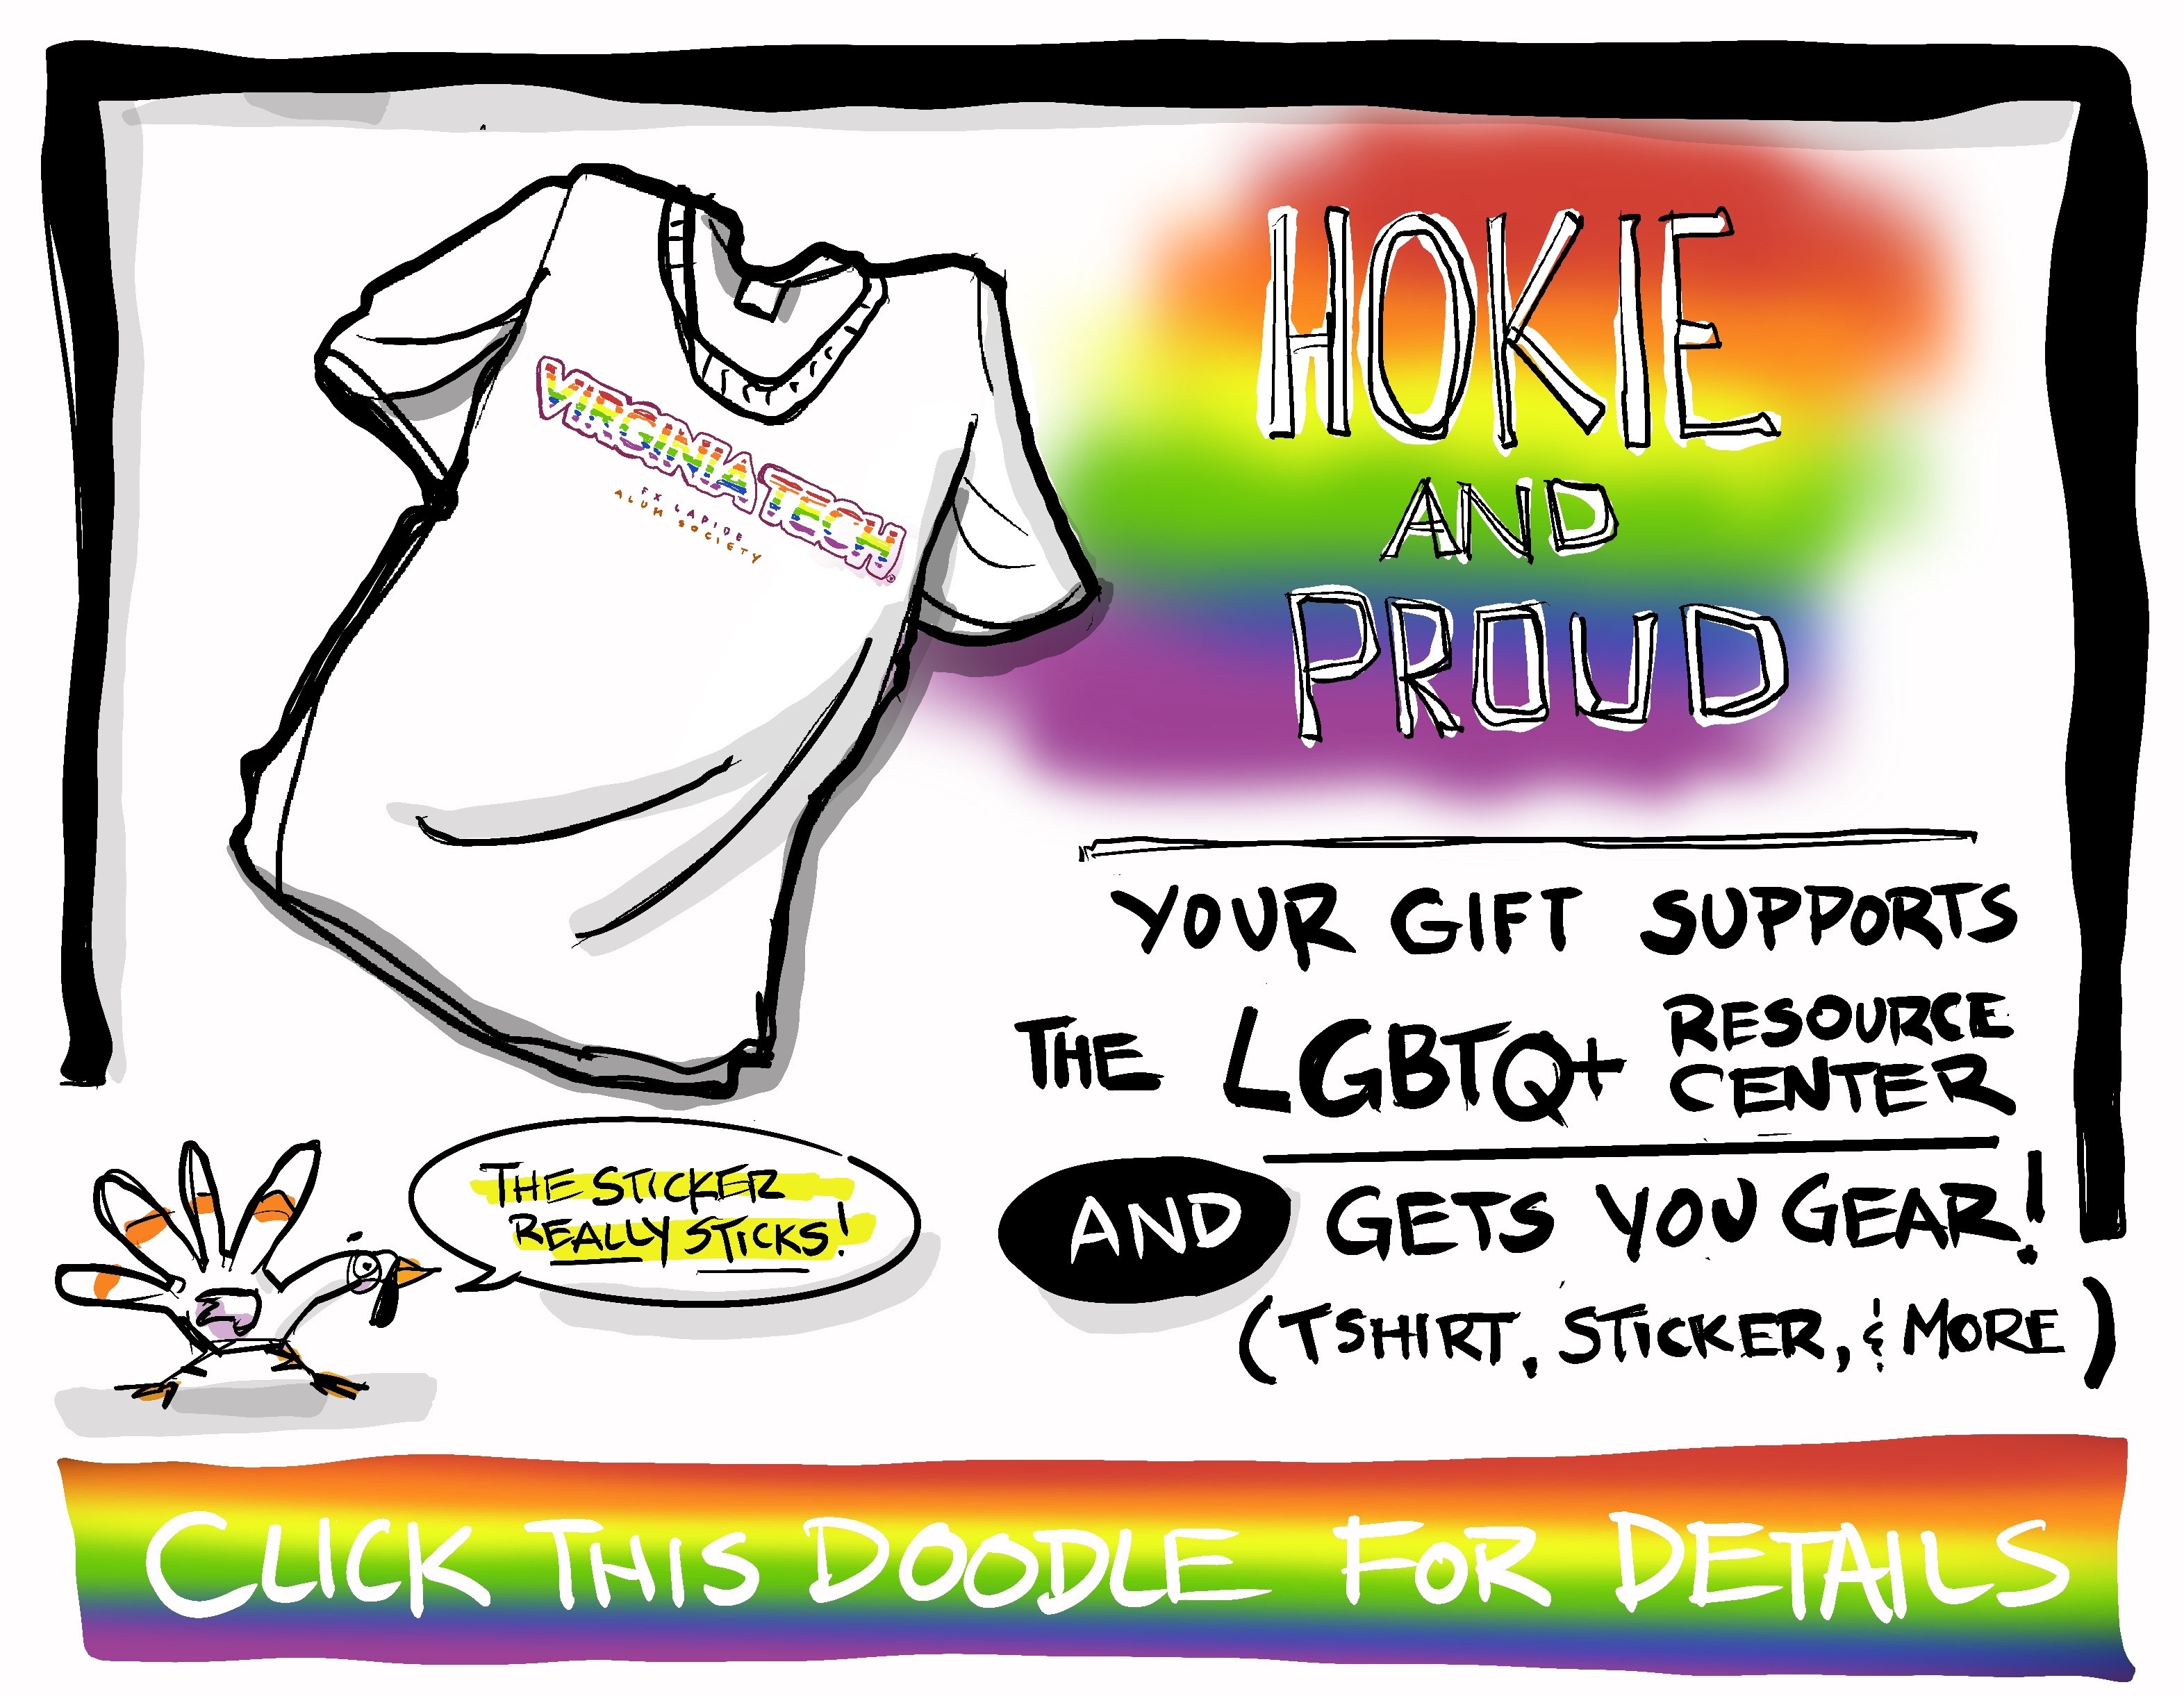 Digital sketch of a Hokie and Proud tshirt to benefit the LGBTQ+ resource center at Virginia Tech